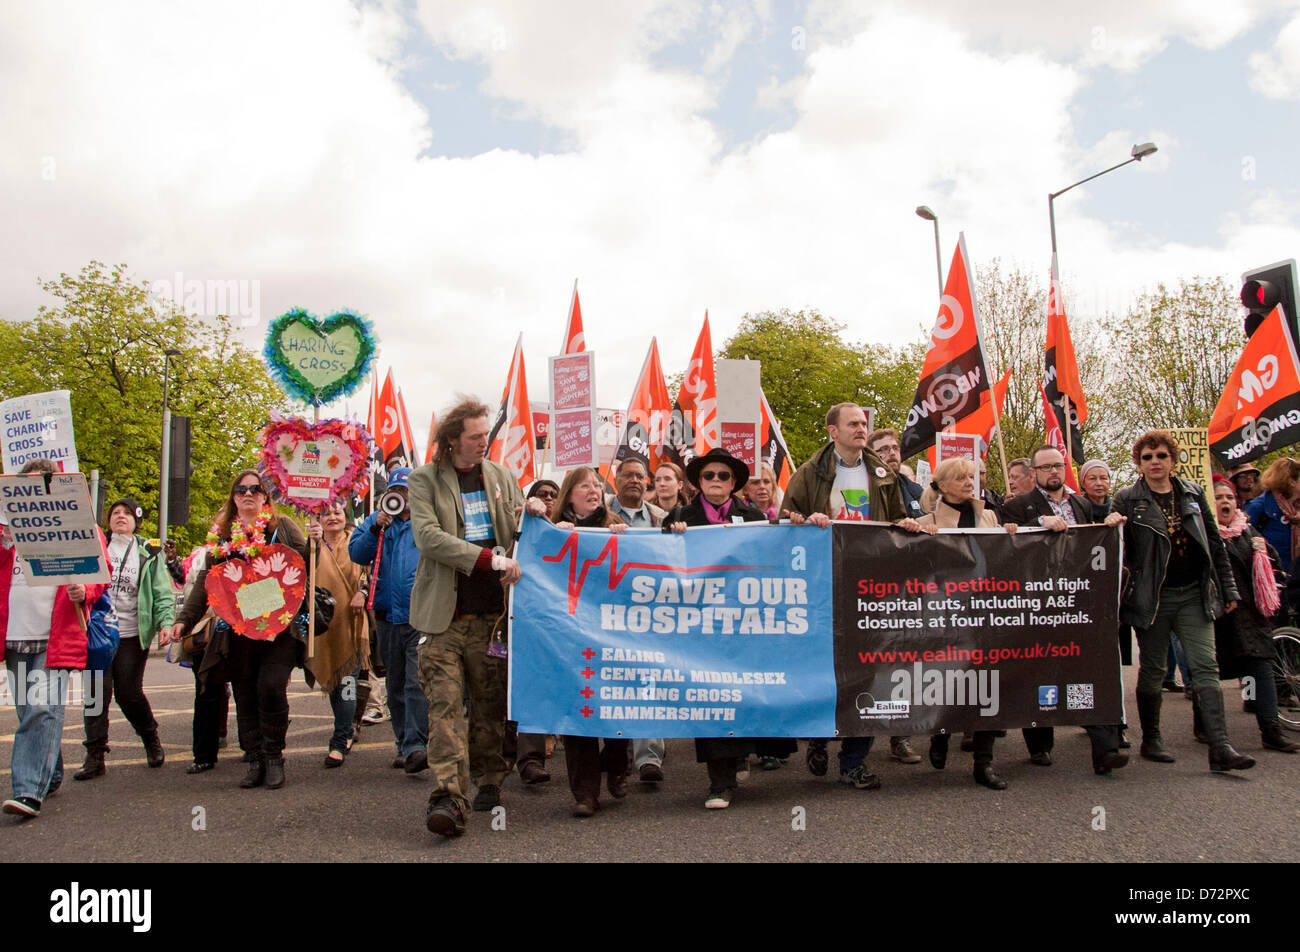 London, UK. 27th April 2013. Protesters marching from Acton Park to Ealing Common to hold a rally against the closure of vital services at Ealing Hospital, such as the A&E and Maternity wing. Credit: Pete Maclaine/Alamy Live News Stock Photo